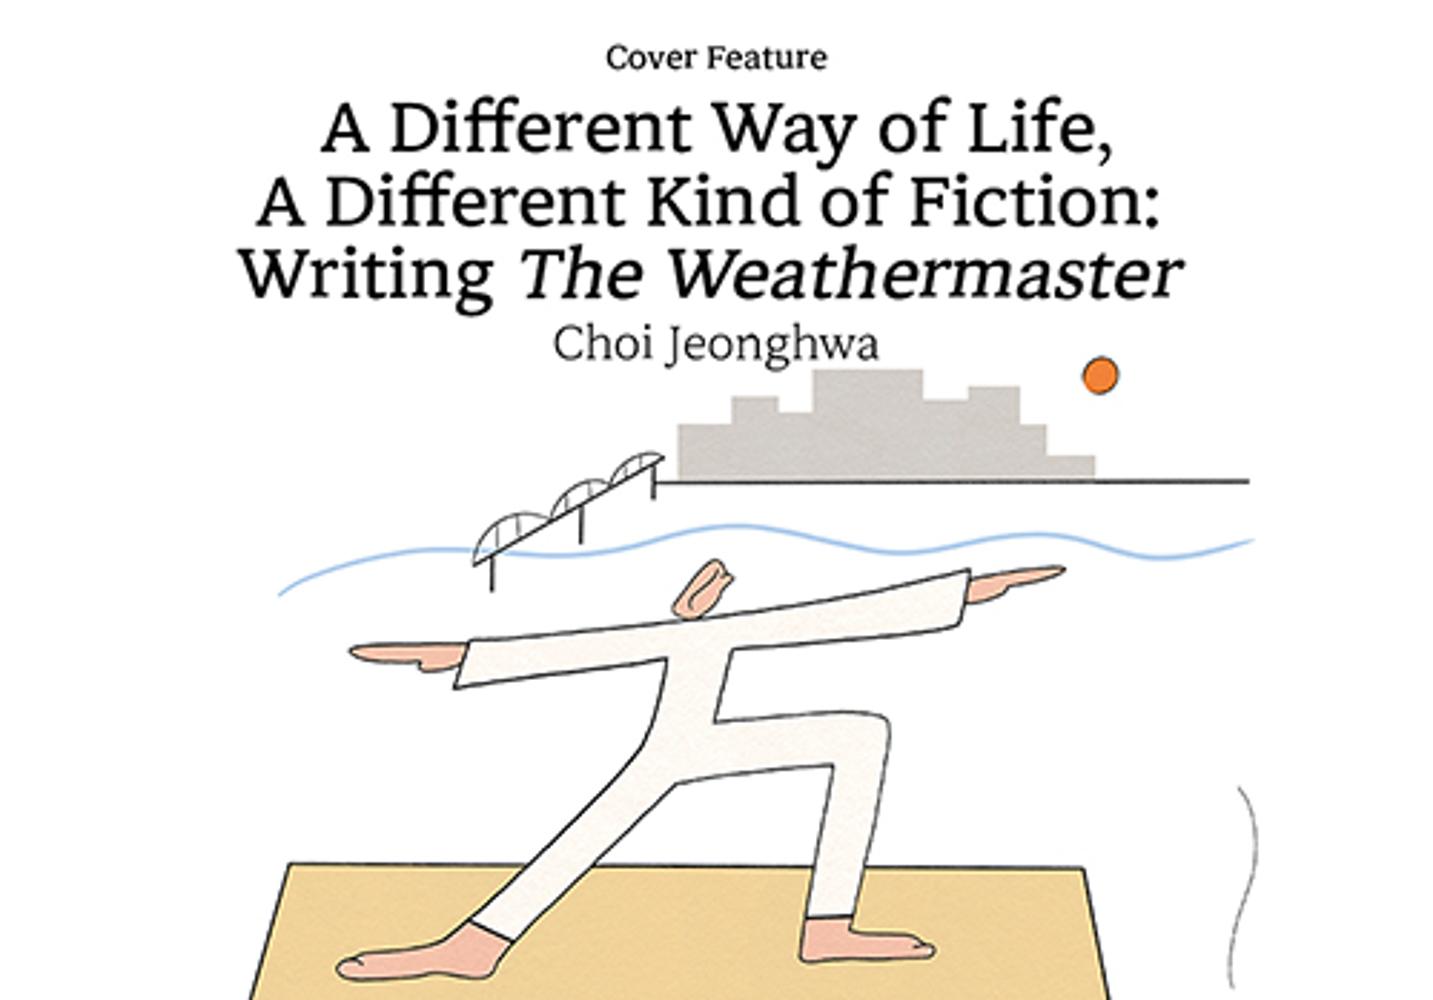 [Cover Feature] A Different Way of Life, A Different Kind of Fiction: Writing The Weathermaster